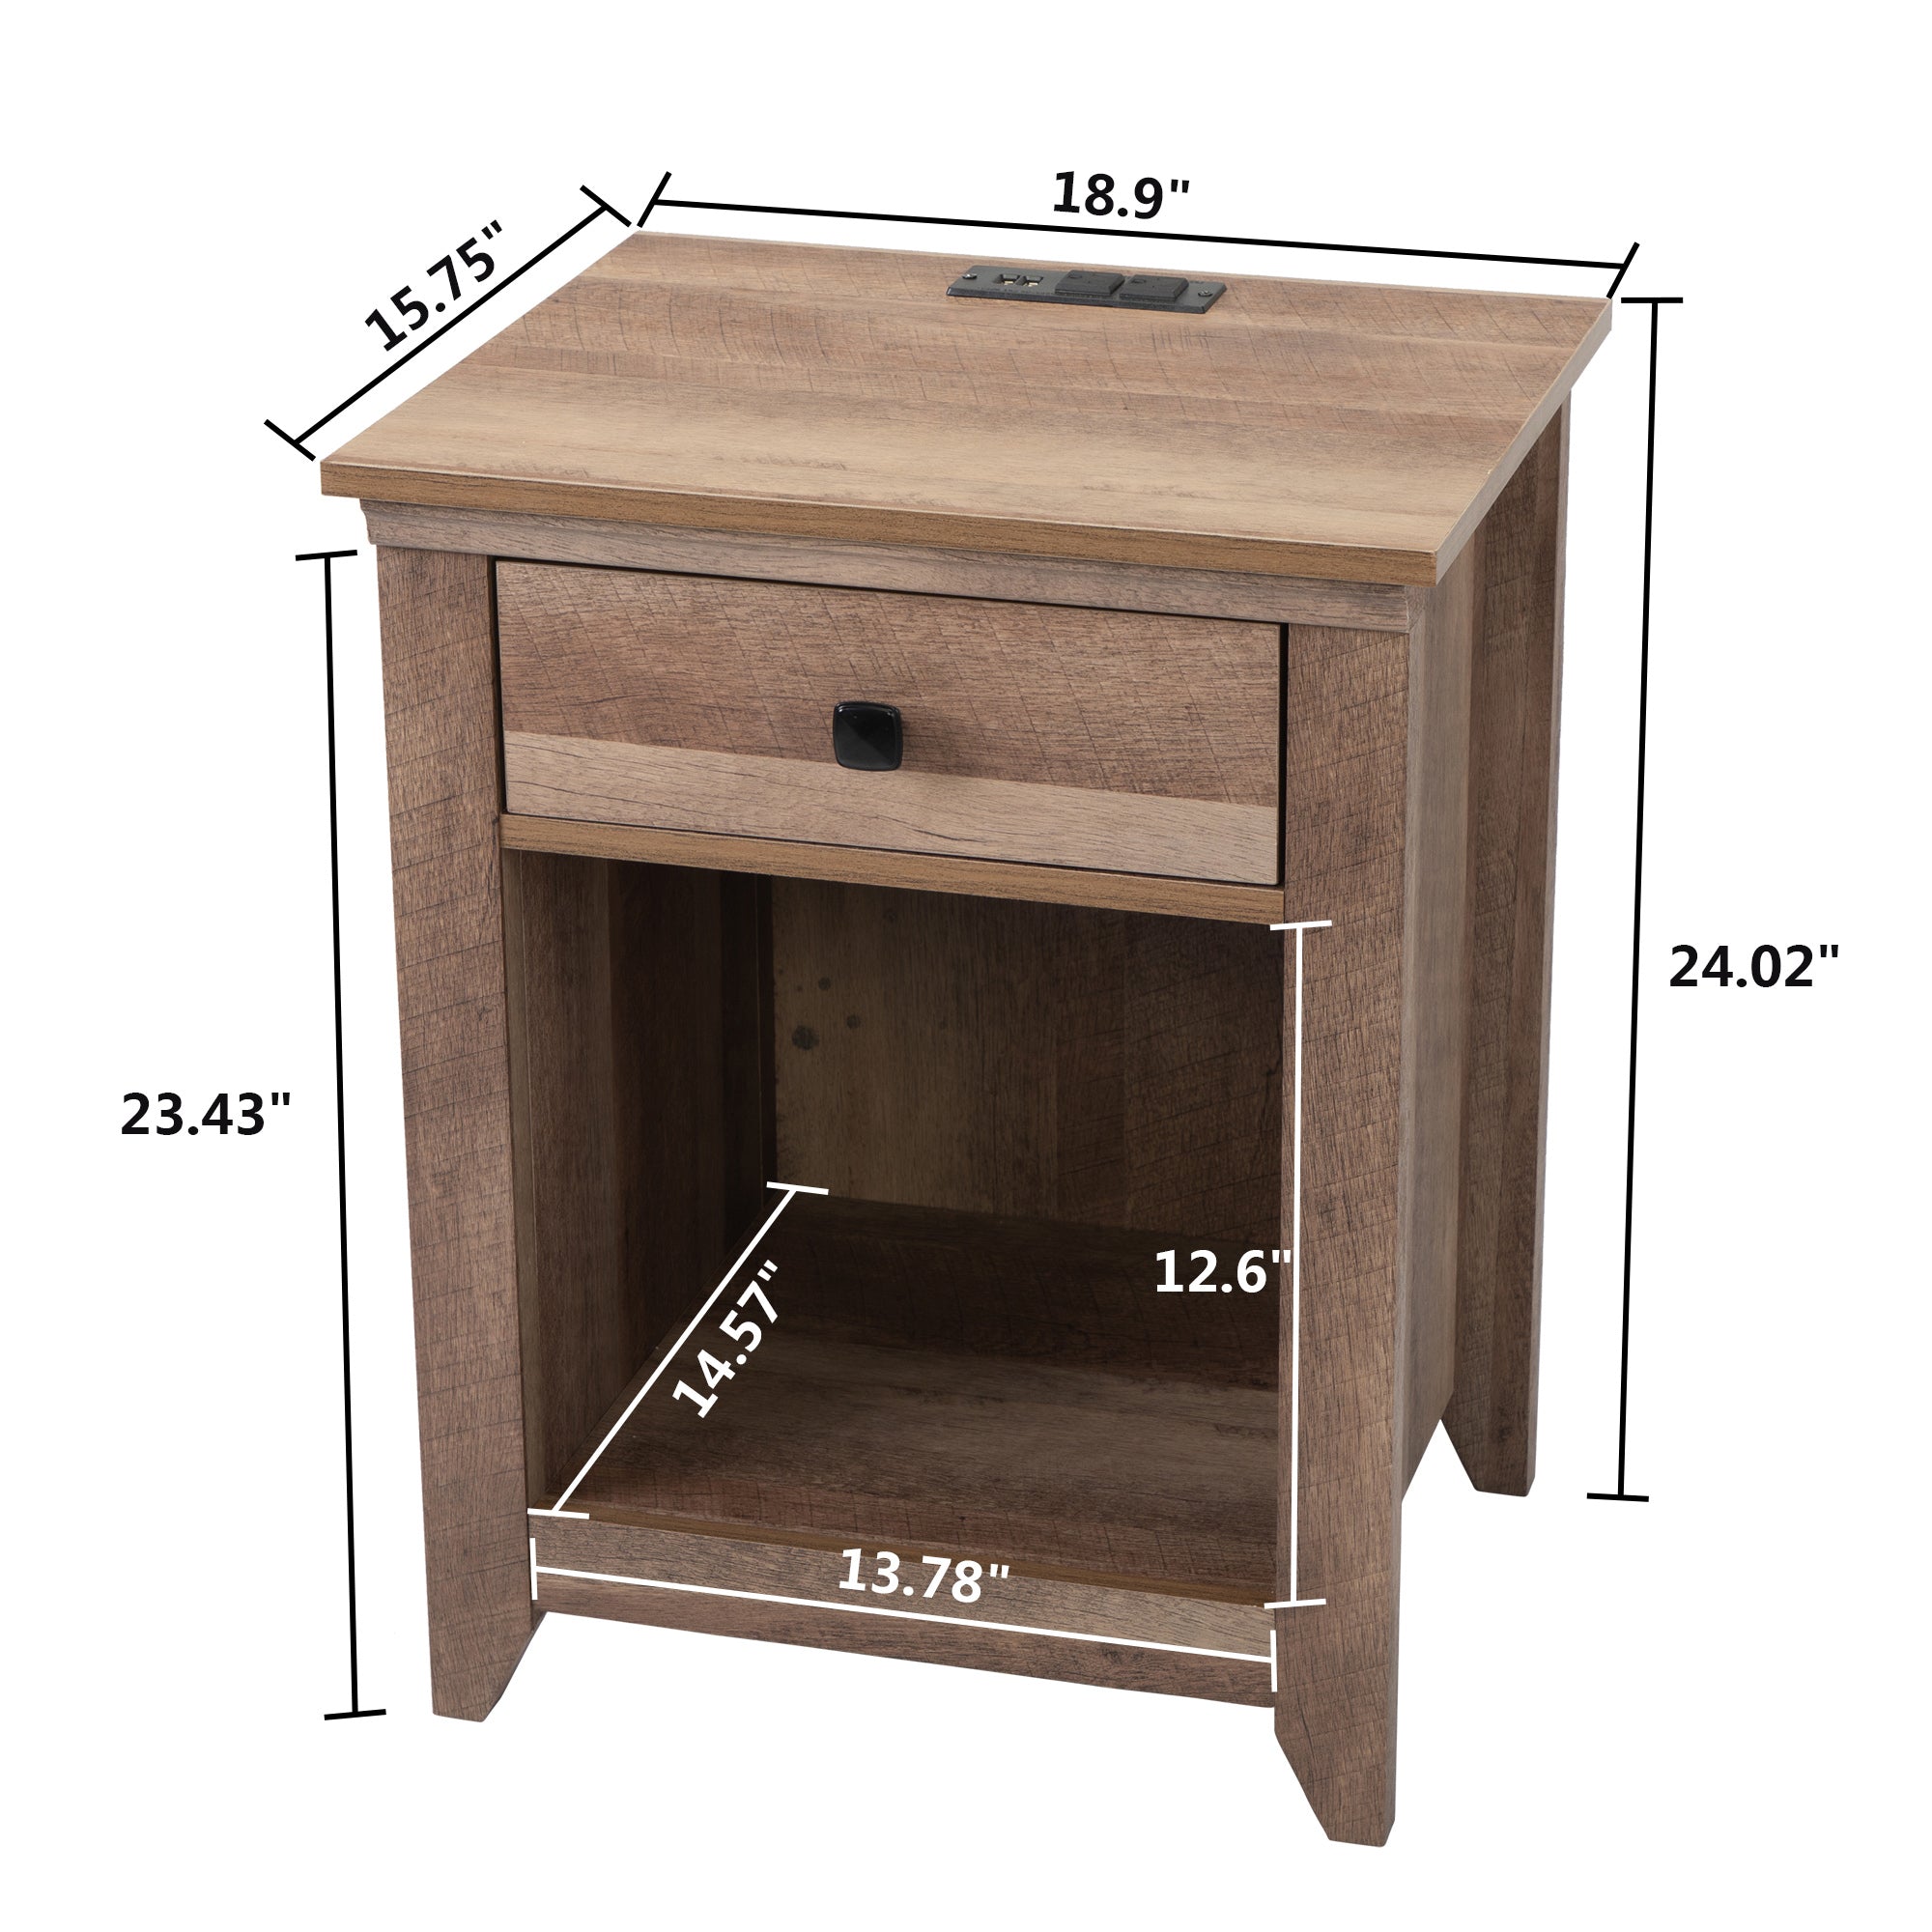 1-Drawer Wood Nightstand with USB Ports and Open Shelf